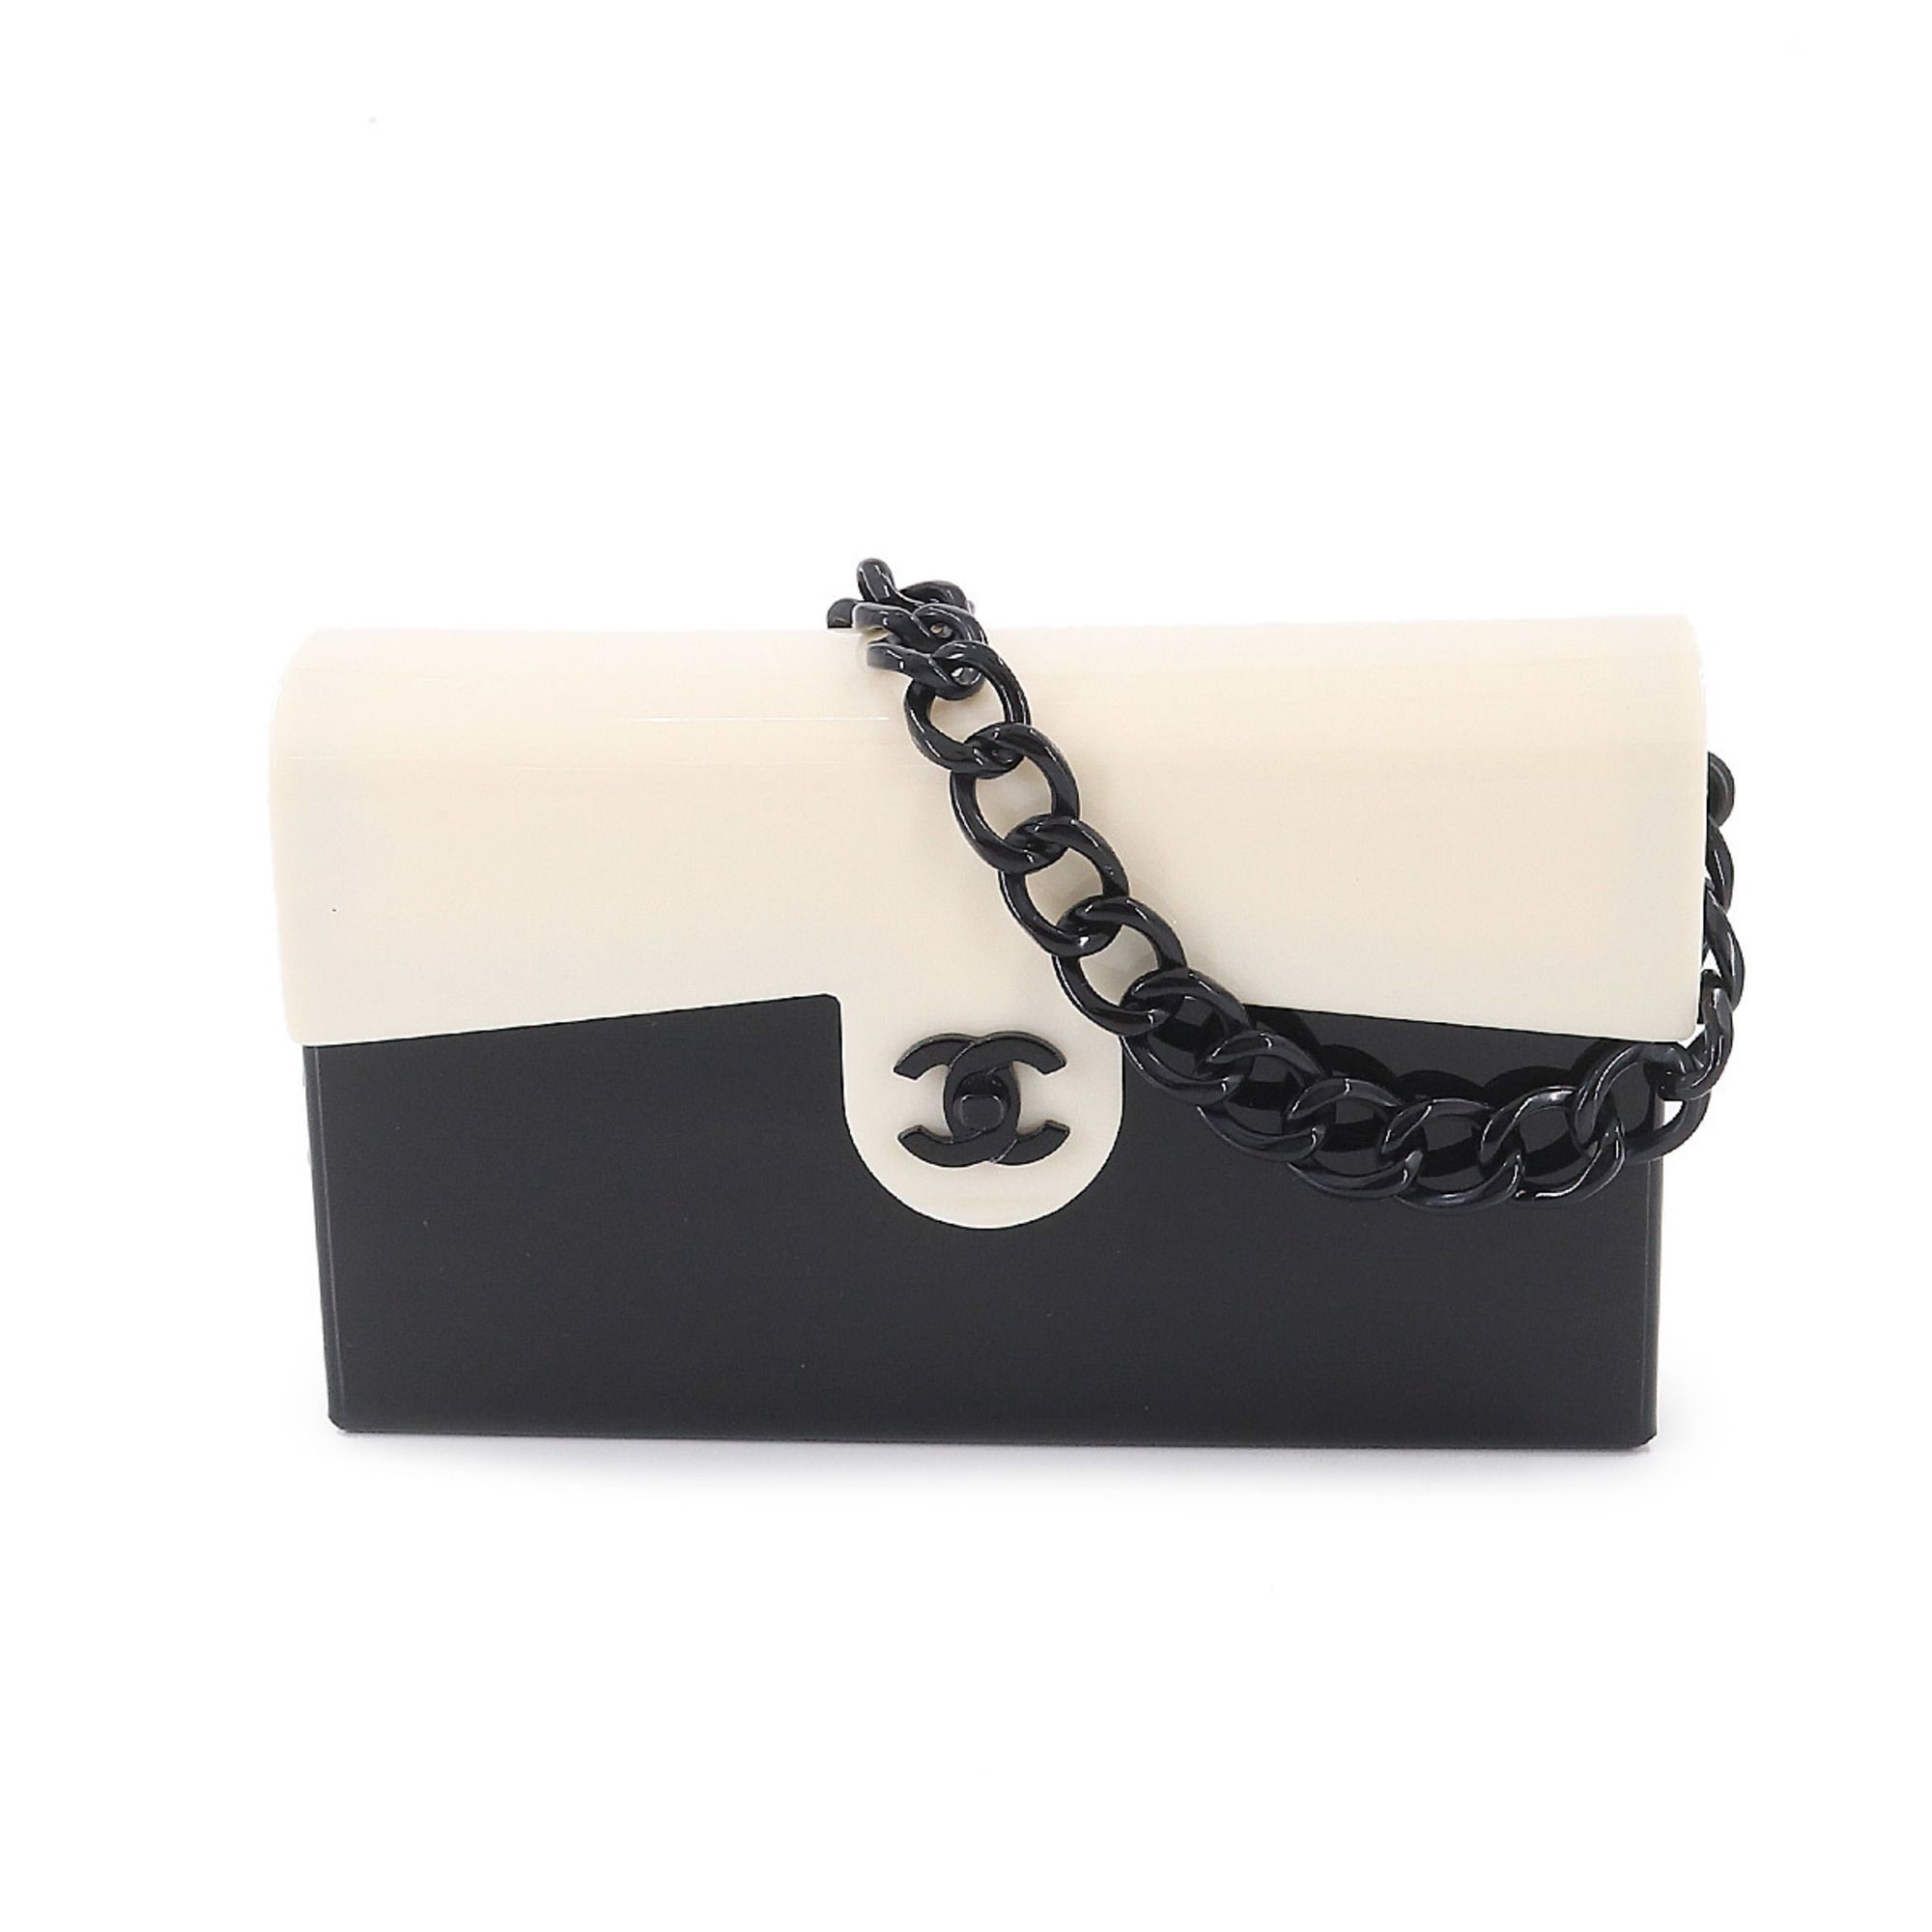 Business Affinity Chanel Bags - Vestiaire Collective